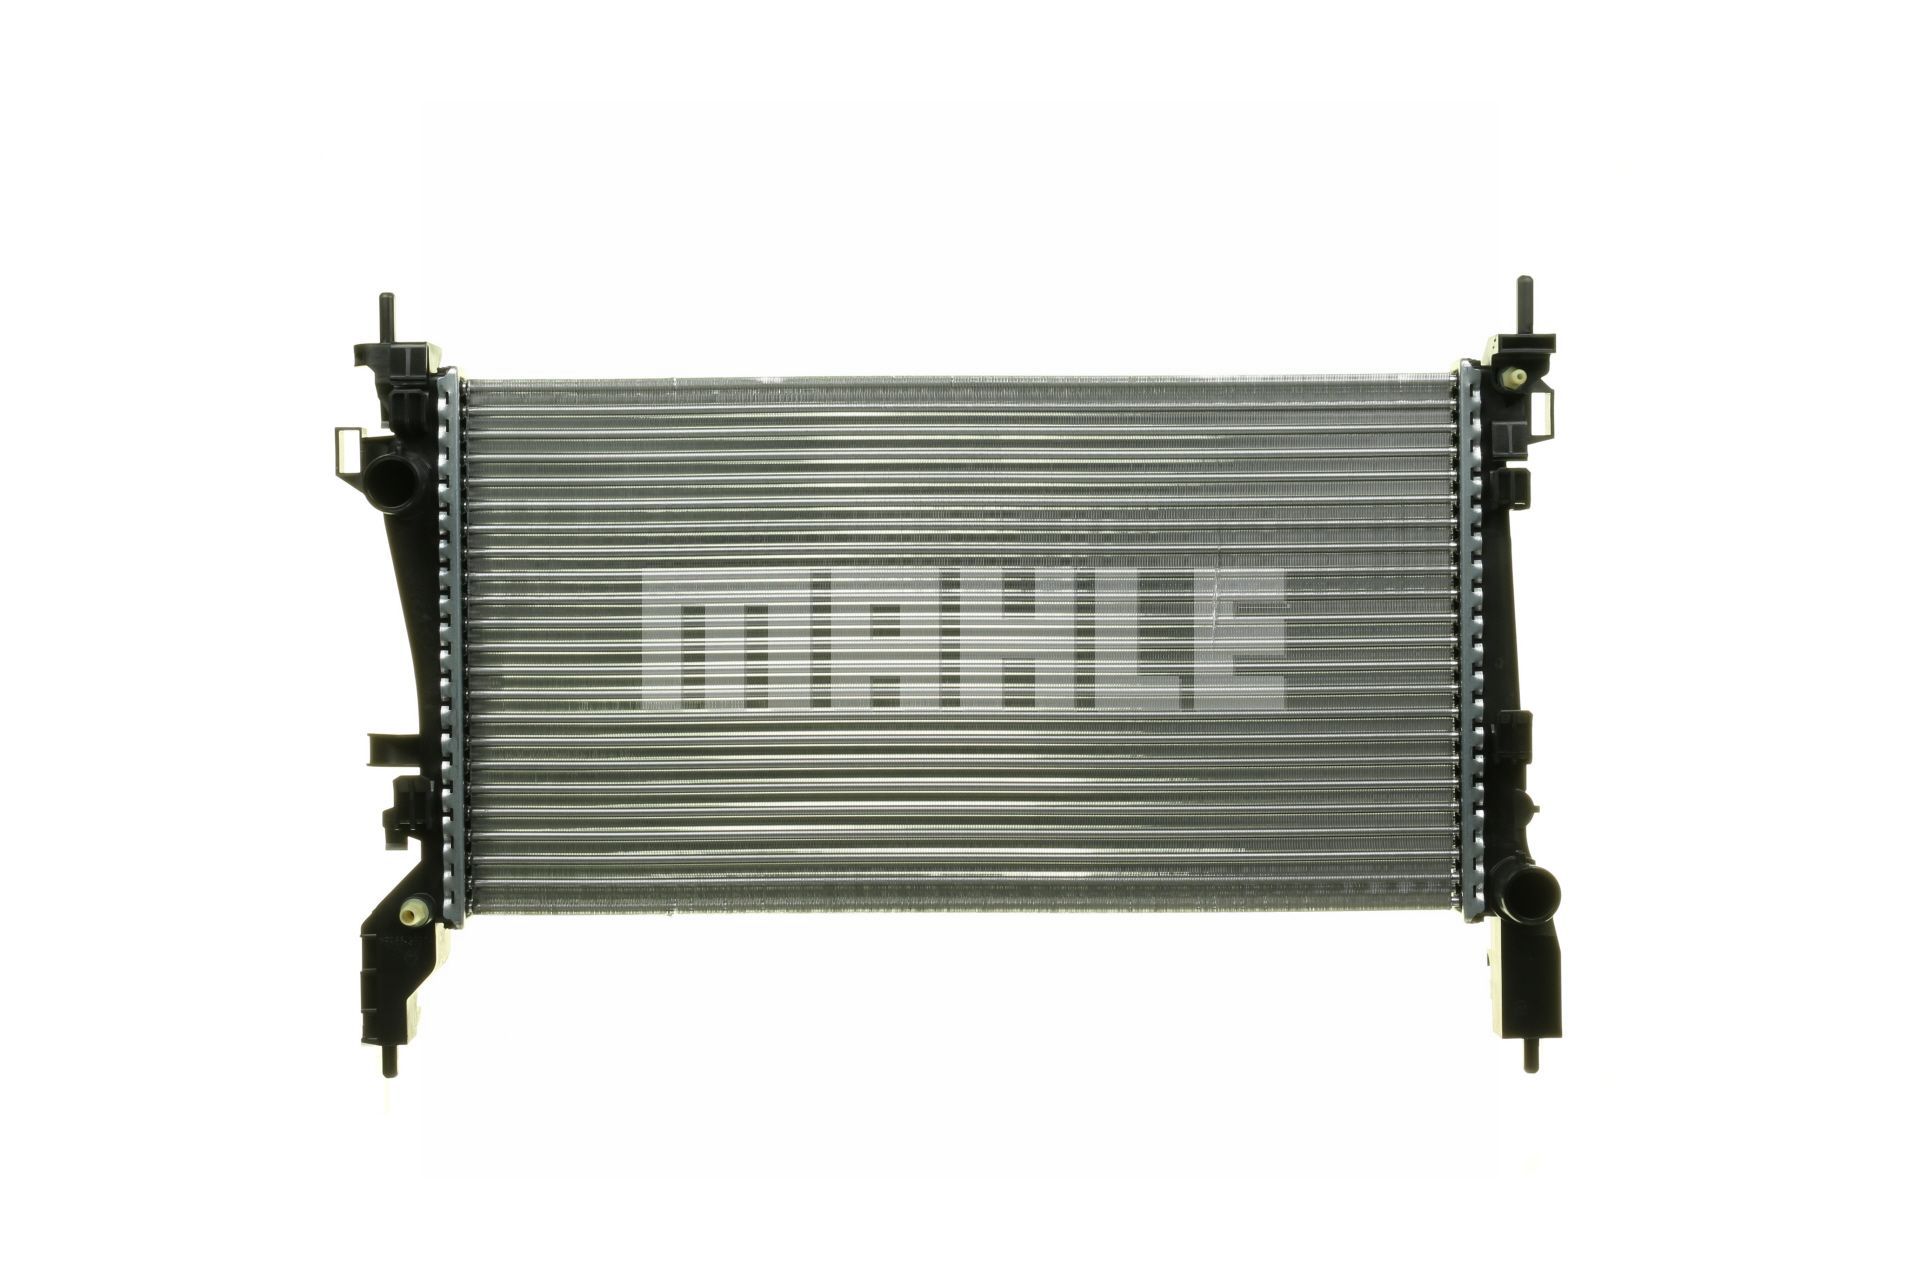 376754711 MAHLE ORIGINAL for vehicles without air conditioning, 630 x 340 x 26 mm, Manual Transmission, Mechanically jointed cooling fins Radiator CR 1130 000P buy